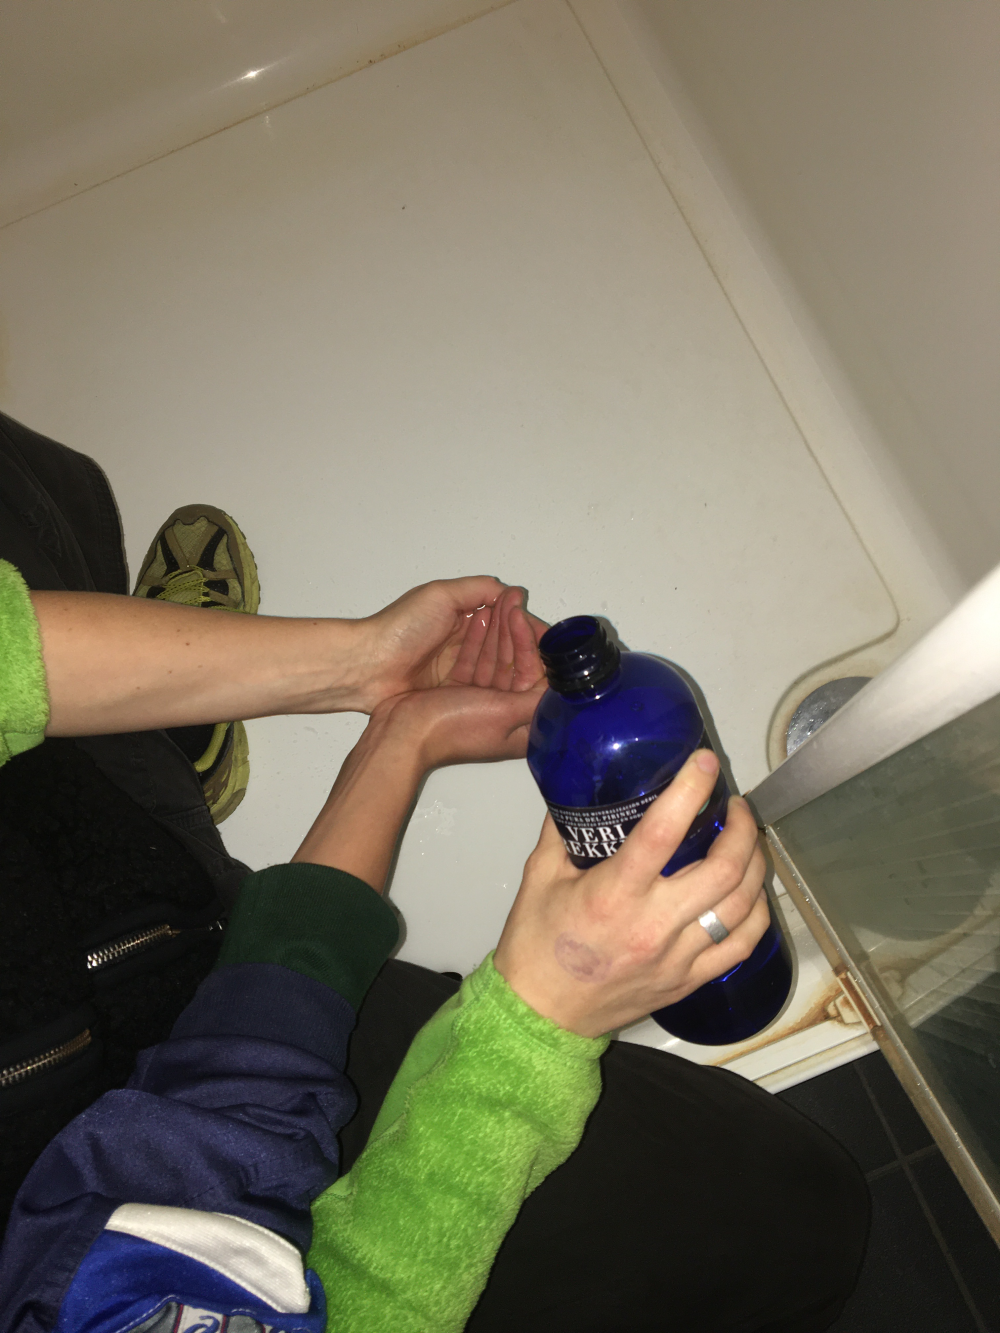 Two people cupping their hands together while one holds a bottle over them